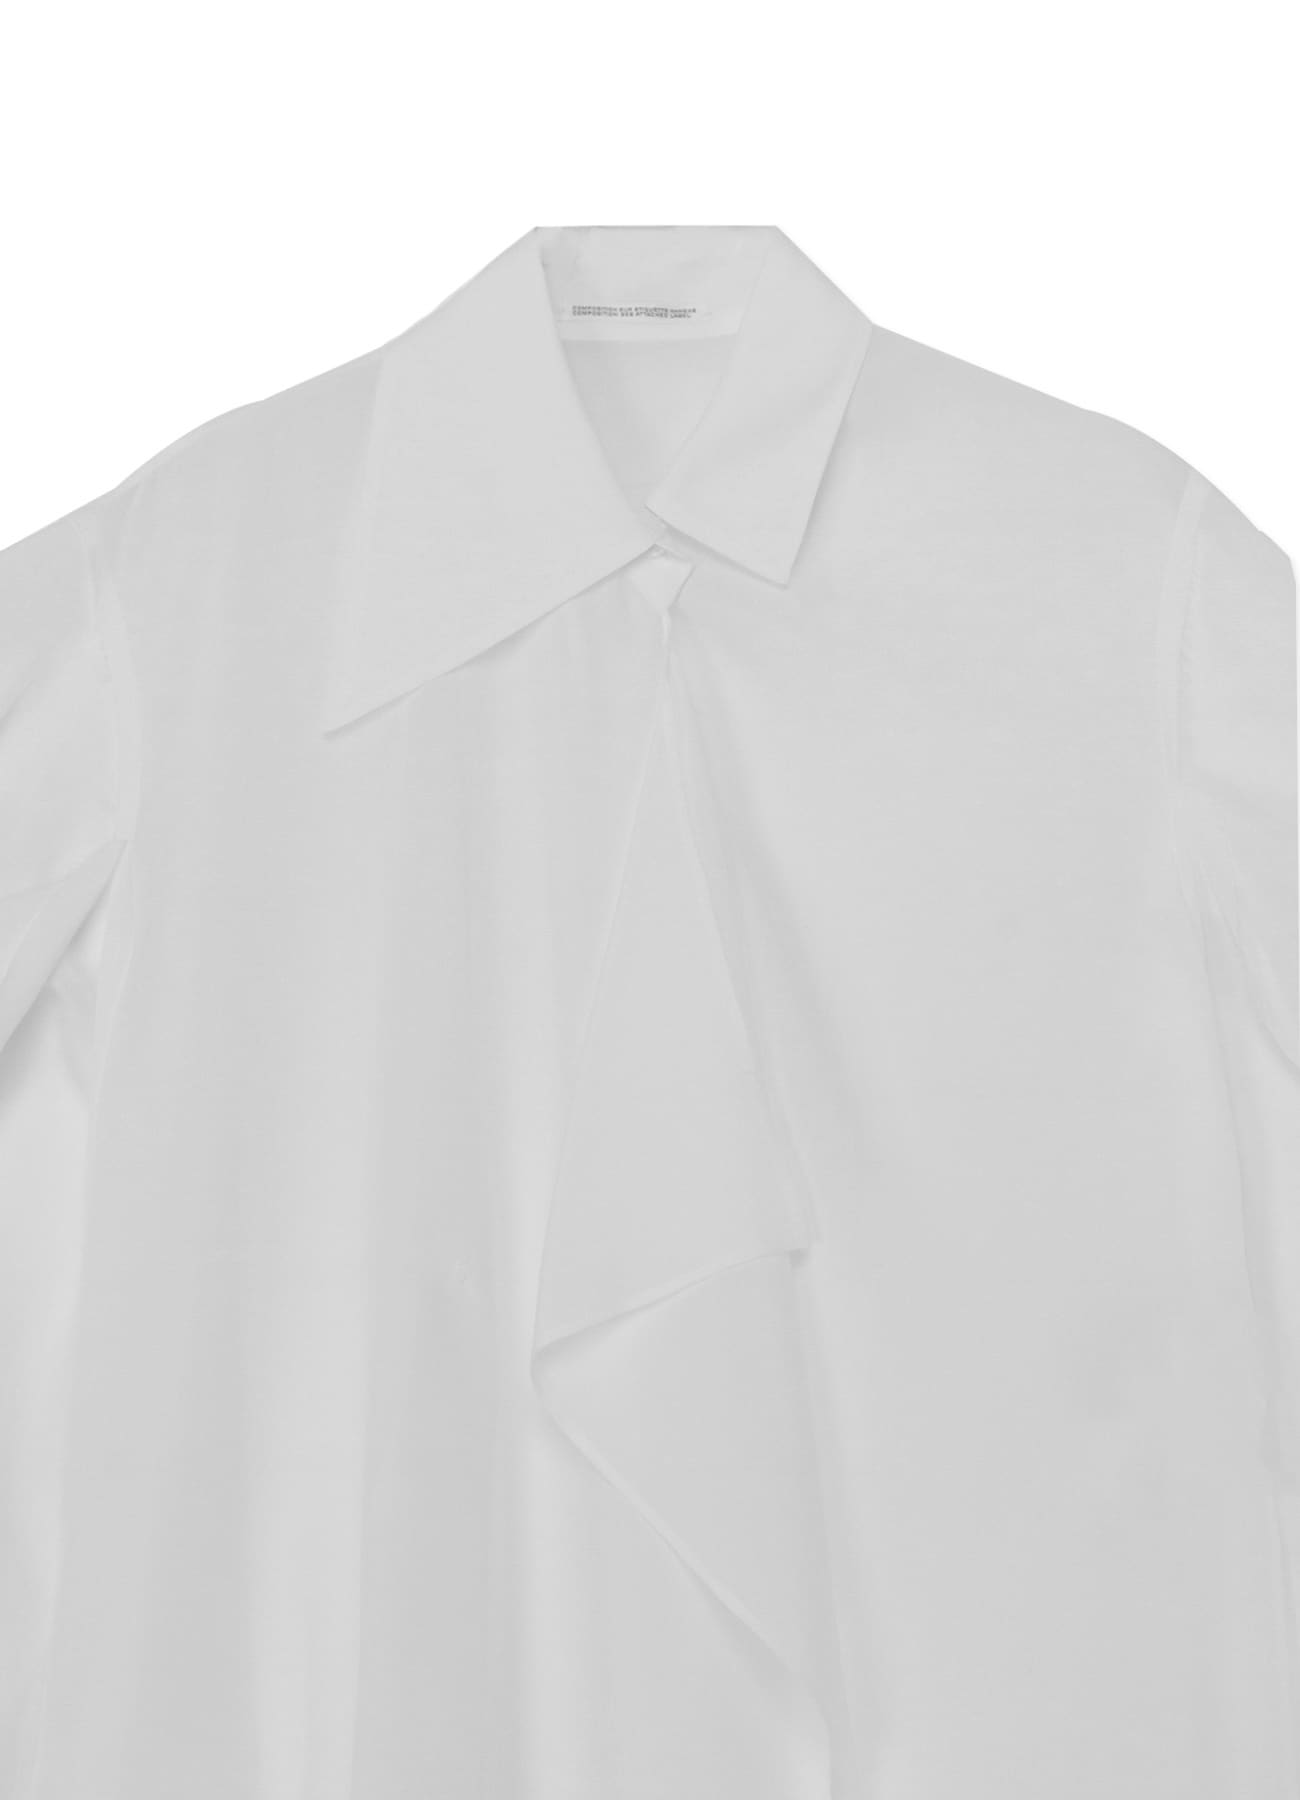 TENCEL BLOUSE WITH ASYMMETRIC COLLAR, FRONT DRAPE AND SHOULDER CUT-OUT DETAIL